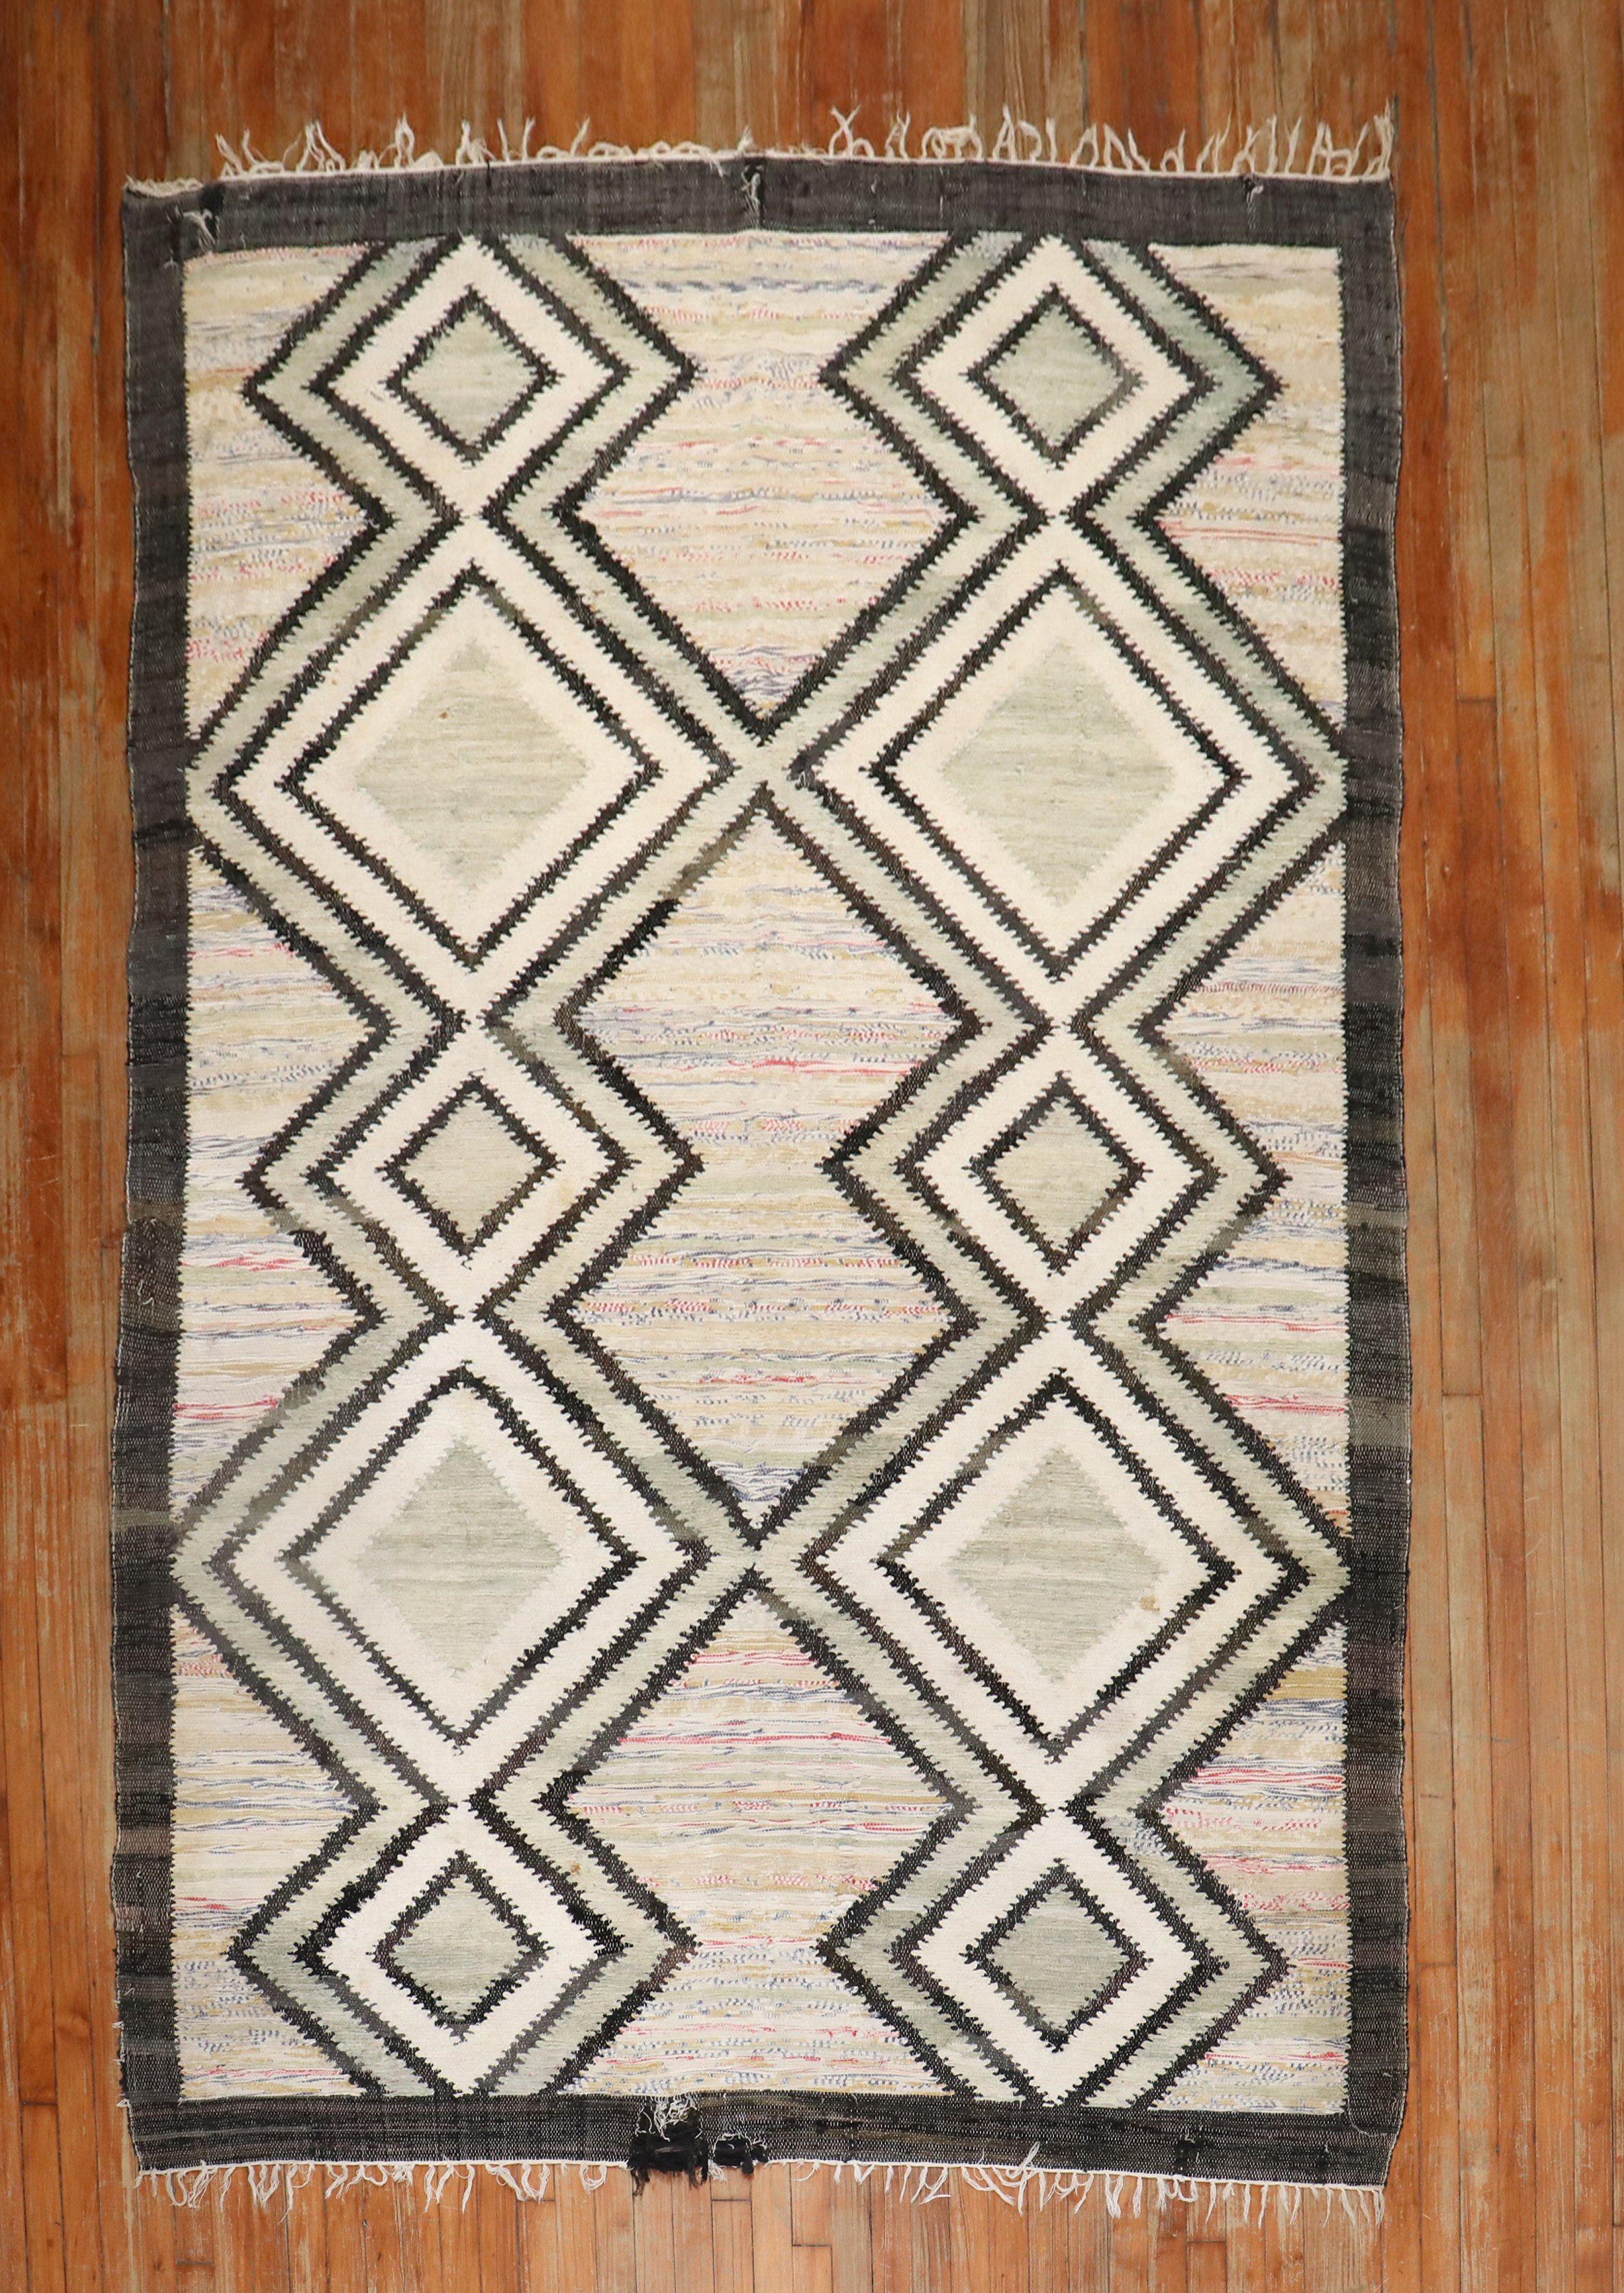 Mid 20th century American braid rug with a large scale pattern.

Measures: 6'2'' x 9'7''.